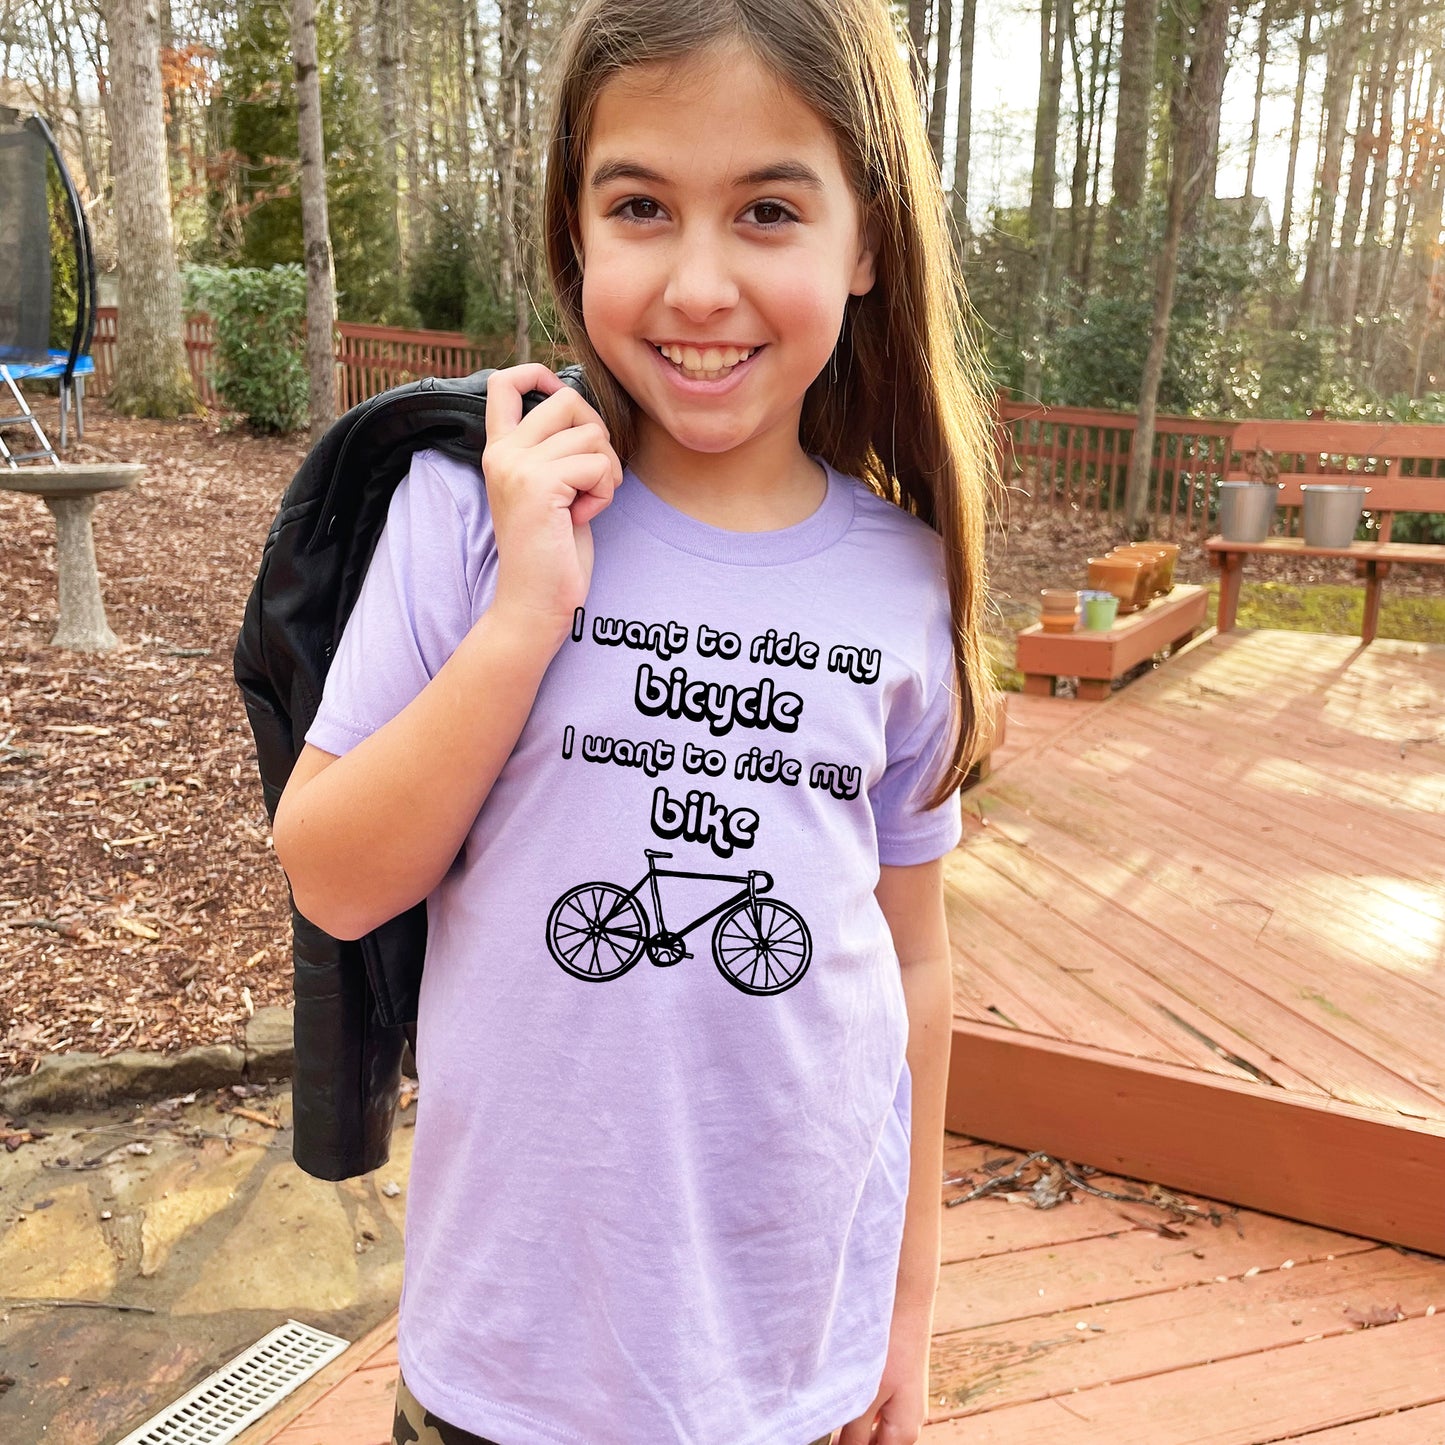 I Want To Ride My Bicycle, I Want To Ride My Bike - Kid's Tee - Columbia Blue or Lavender